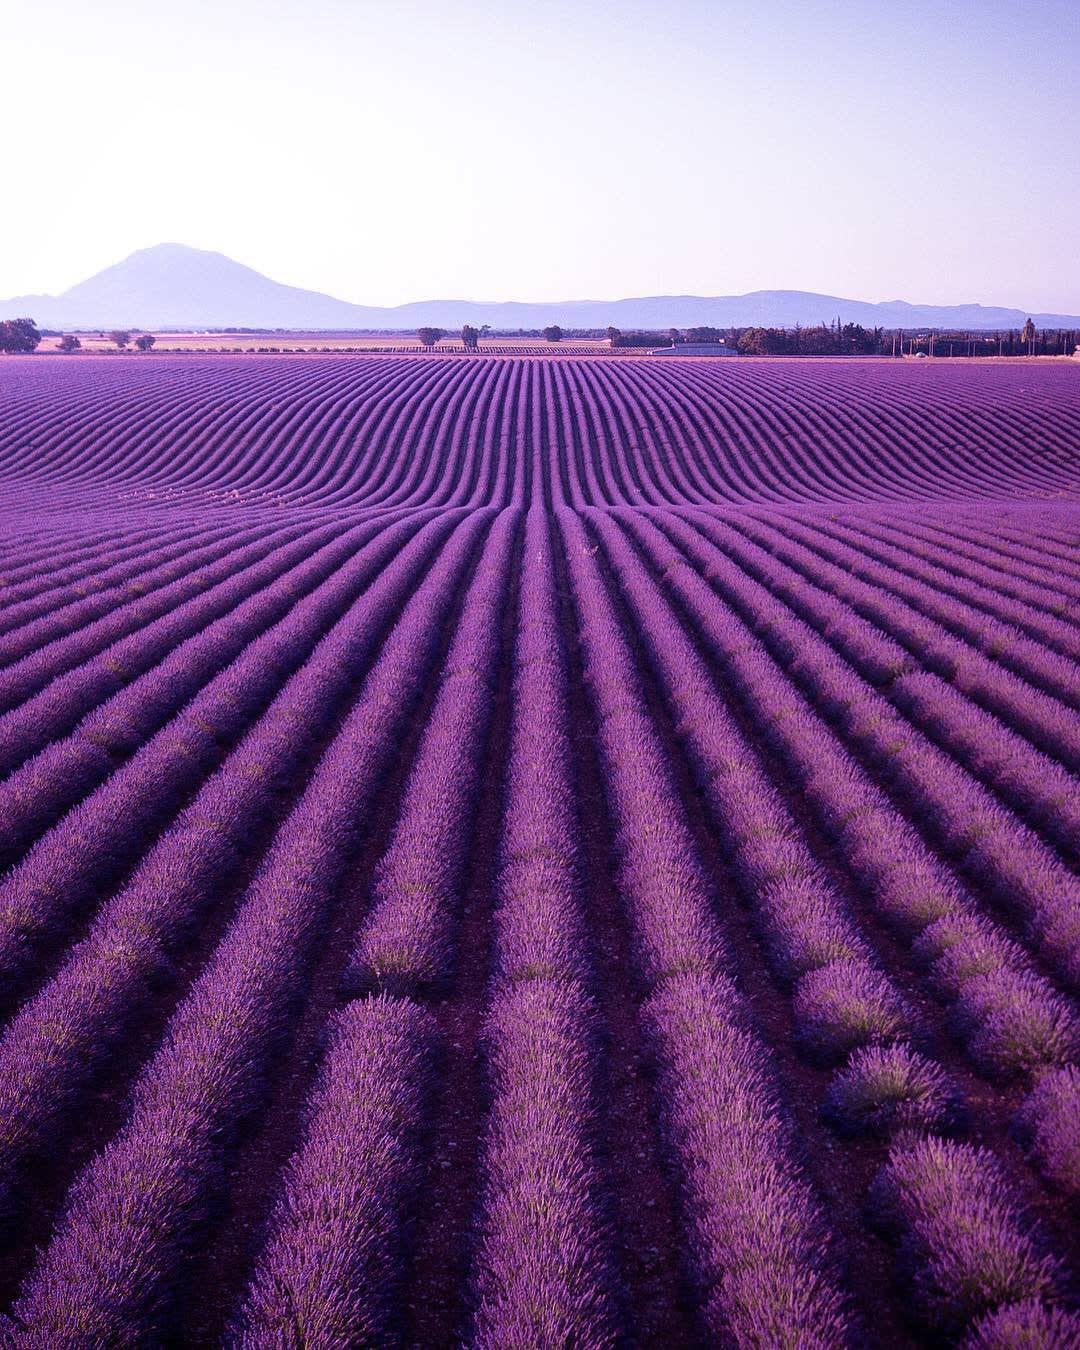 This Lavender Field